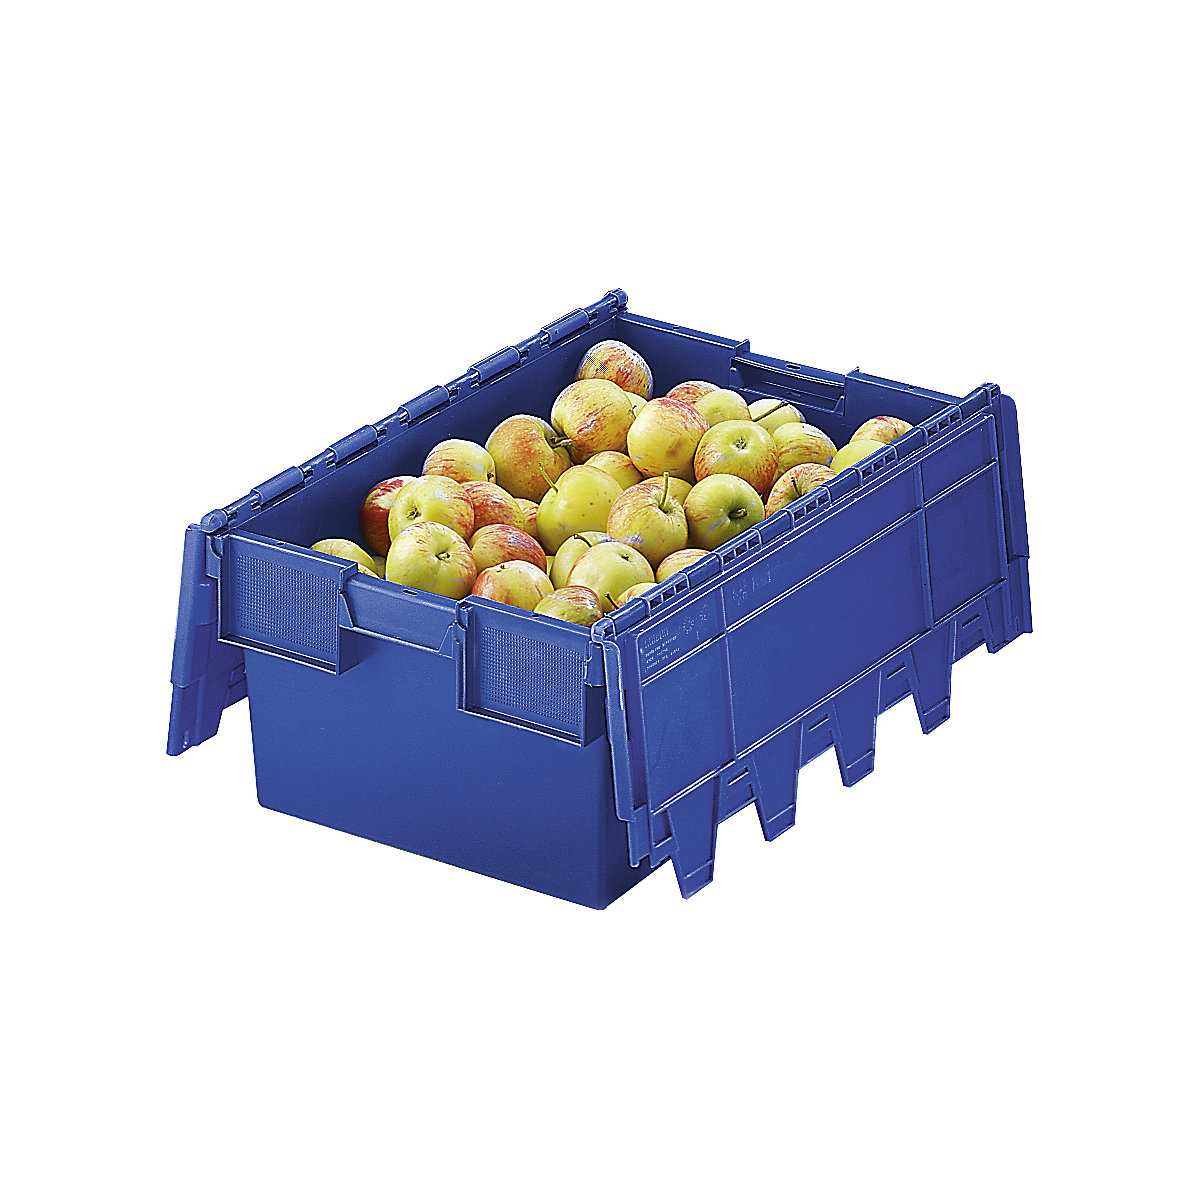 Reusable stacking containers with folding lids, capacity 40 litres, LxWxH 600 x 400 x 250 mm, blue, 10+ items